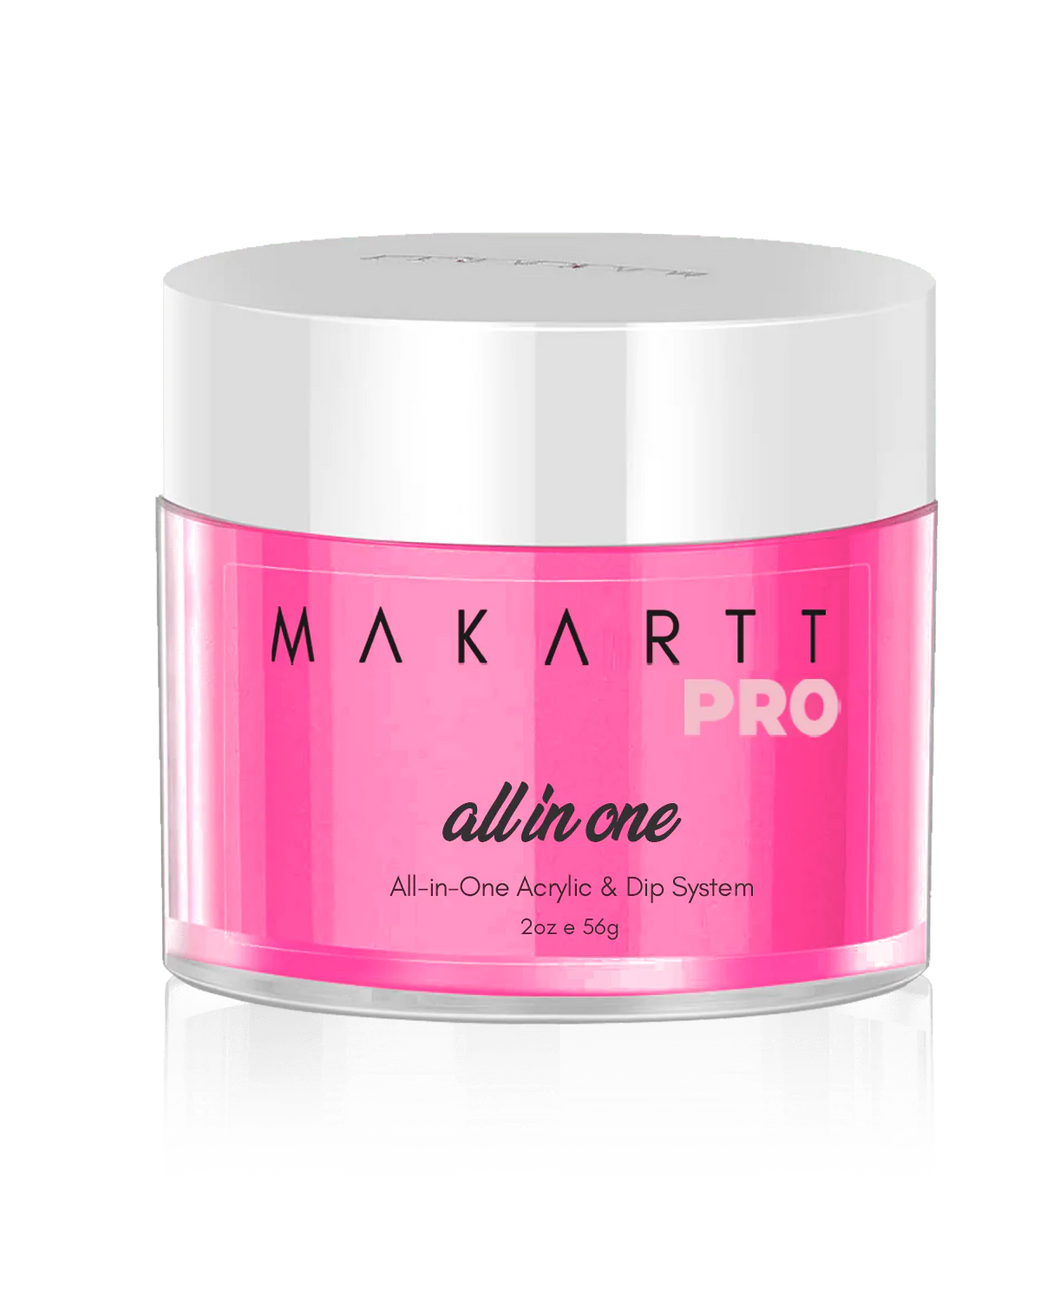 Makartt All in one Acrylic & Dip Powder Pink Robot 2 oz  FY-S0294